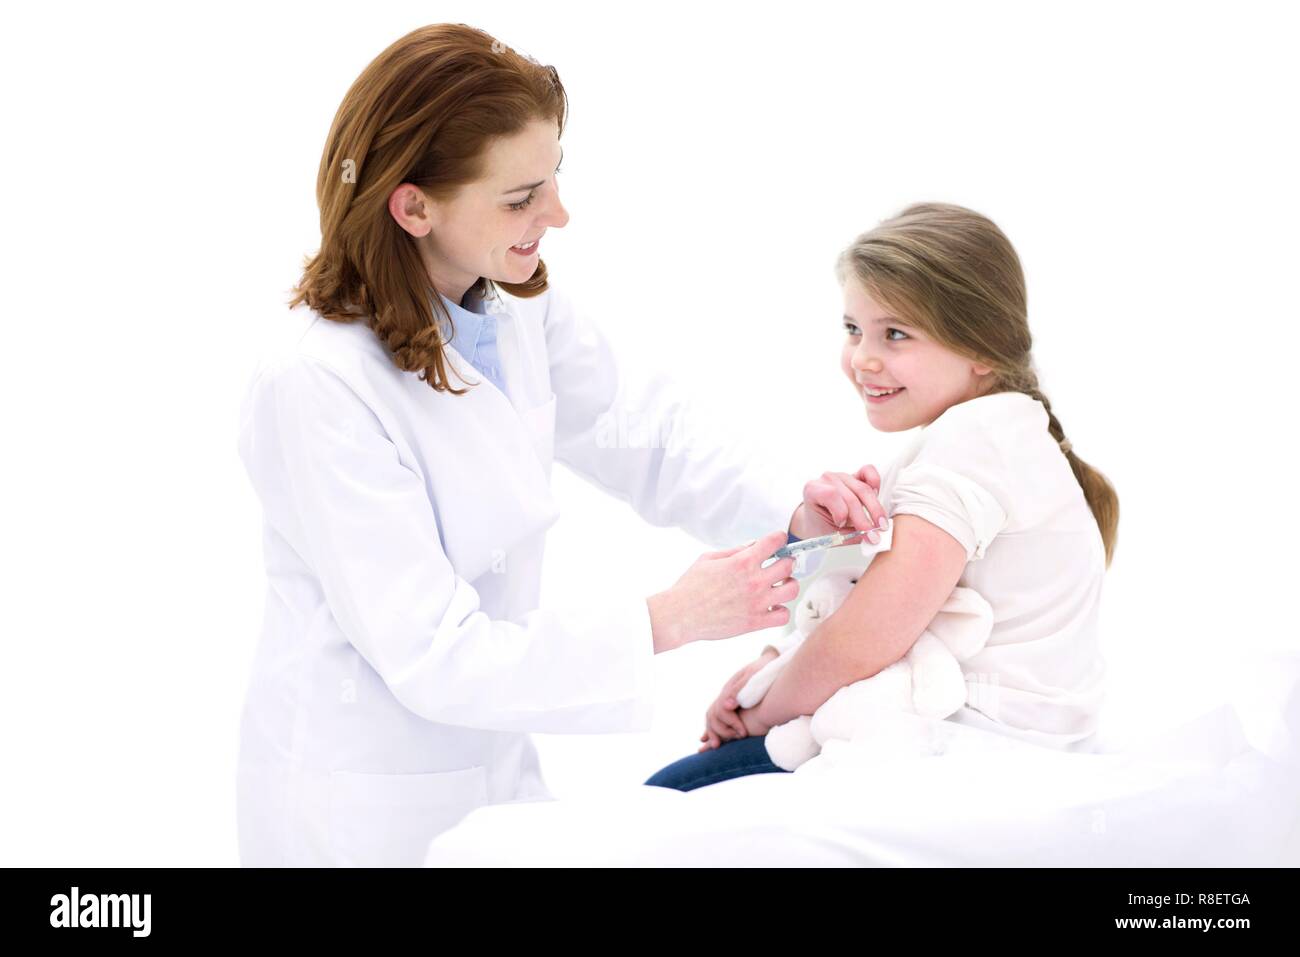 Female doctor injecting young girl in arm. Stock Photo